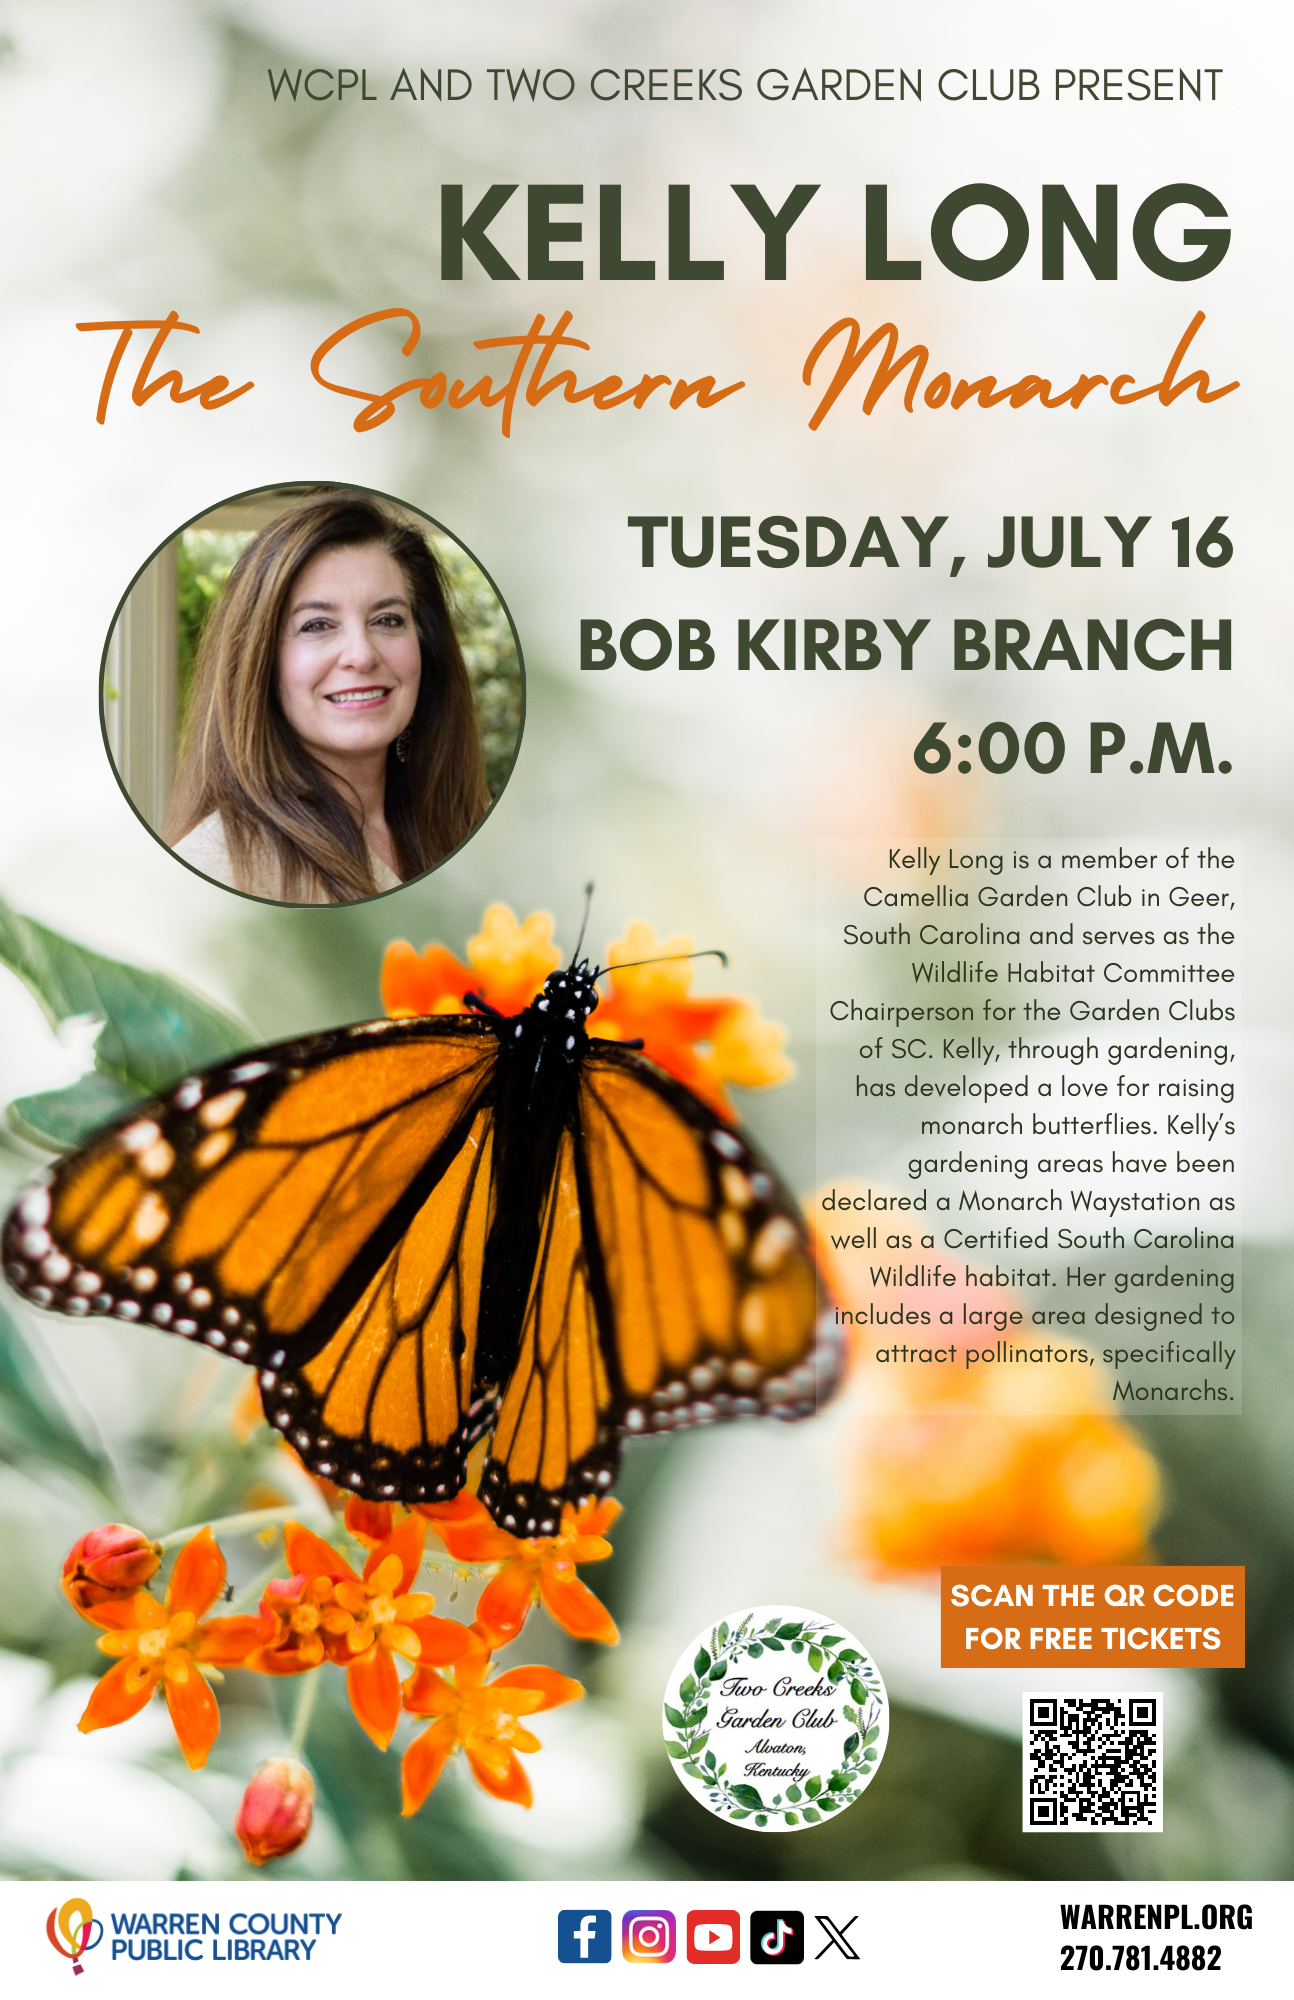 "The Southern Monarch - Kelly Long"    Sponsored by Two Creeks Garden Club and Warren County Public Library